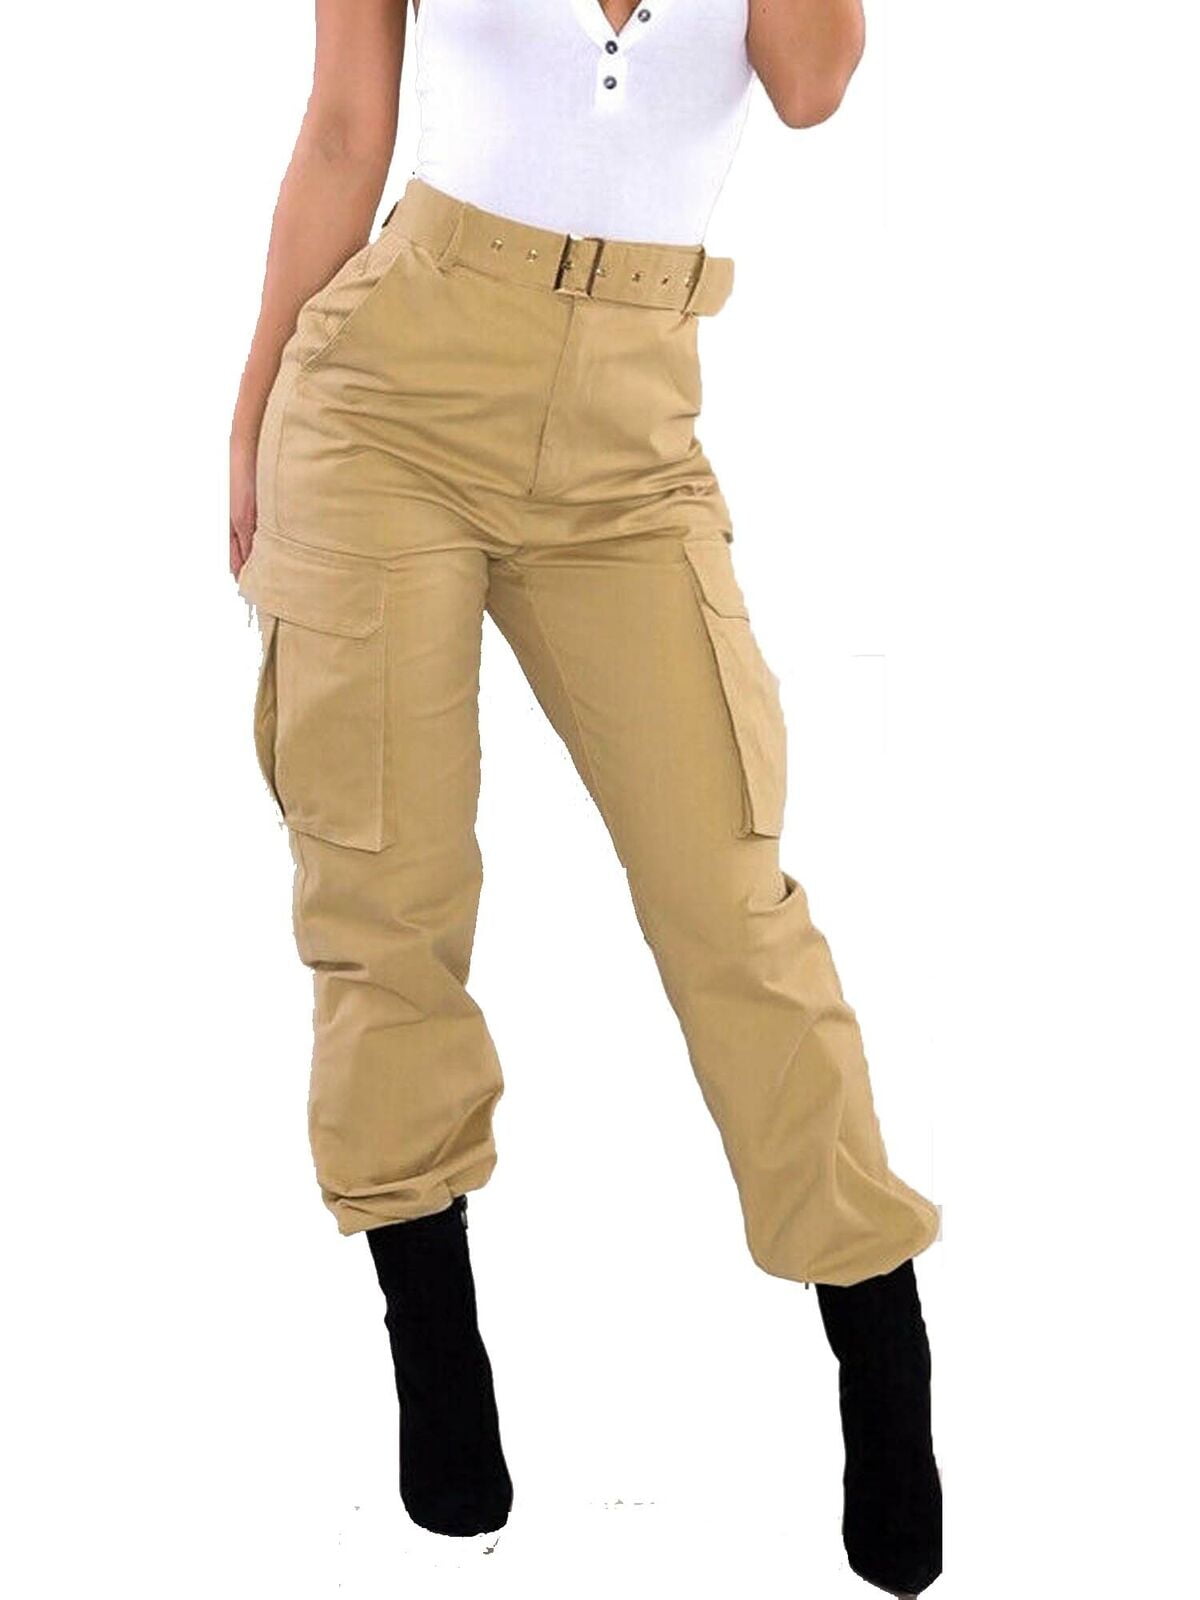 Hirigin Women Army Military Combat Jeans Pant Cargo Trousers Sports ...